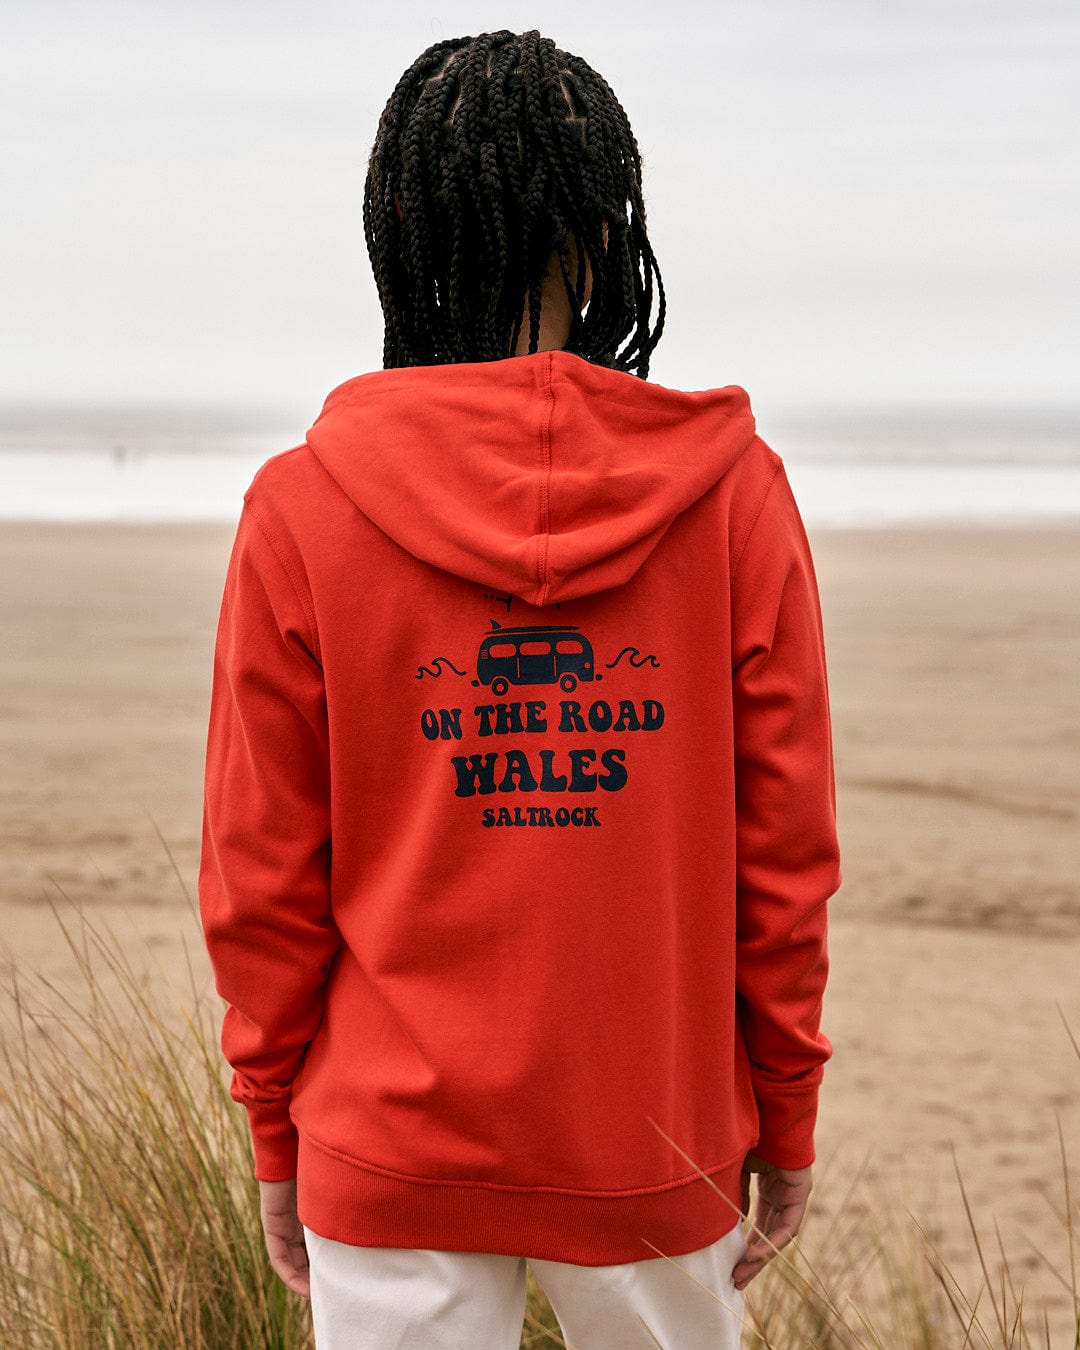 A woman wearing a Saltrock On The Road Wales - Women's Zip Hoodie - Red standing on the beach.